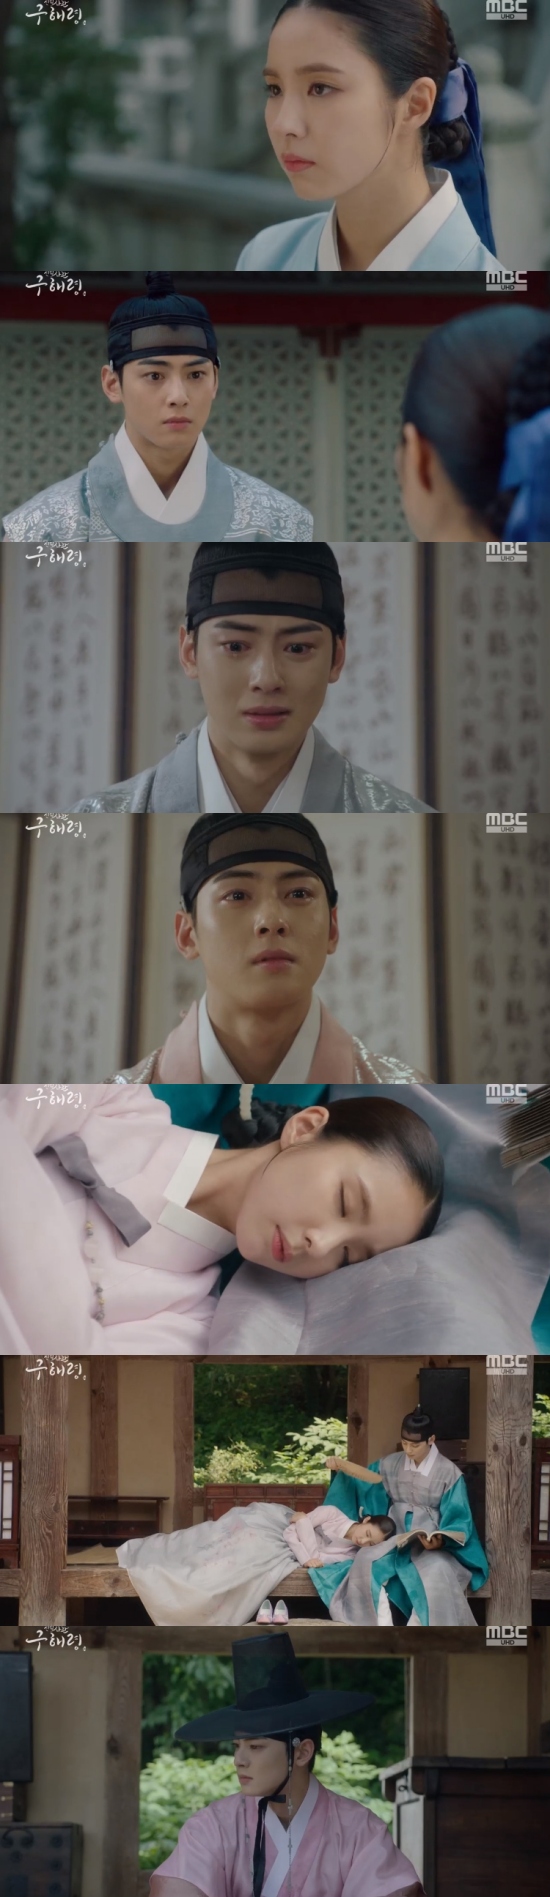 Newcomer Rookie Historian Goo Hae-ryung Cha Eun-woo and Shin Se-kyung parted ways.In the 31st and 32nd episodes of MBCs New Entrepreneur Rookie Historian Goe-ryung broadcast on the 5th, Lee Rim (Cha Eun-woo) was shown holding Rookie Historian Goo Hae-ryungShin Se-kyung).On this day, Irim was desperate to know that the ceremony was installed.Irim went to visit Mr. Chaim with Rookie Historian Goo Hae-ryung (Shin Se-kyung), and said, I have a request for Mama.Please stop my marriage and stop my marriage. I have a GLOW that I already have in my heart. I am so deeply loving that I do not want anyone other than that GLOW However, Mr. Lim refused to ask for Lee Lim, saying, The seaman is the Sejo of Joseon of this country before he is a man, and the marriage of Sejo of Joseon is not a private affair but a national history.I understand how much you feel. Leave your heart in mind and be proud. Thats for the Taoist and for the GLOWIrim also felt sad about the attitude of the indifferent Rookie Historian Goo Hae-ryung, Why are you not okay? What is so nonchalant and indifferent.Is this a no-brainer for you? What youre thinking. What youre feeling. Show me something, he said.After all, Rookie Historian Goo Hae-ryung said, What do you think of me? What was Mama thinking? I hope Mama would accept that request.And then you wanted me to name myself and ask me to make that GLOW my own? You thought it was enough to drag me to the wedding, regardless of my heart or will.I told you clearly, I dont want to be a couple in the rites. I dont want to be there. Irim said, I dont care if you dont want me. Stay there or Ill lose you. Be honest. You dont want me to marry anyone.Its not okay, said Rookie Historian Goo Hae-ryung, who said, Its a fish name. Follow me.Irim tried to forget Rookie Historian Goo Hae-ryung, but missed the scene of marrying Rookie Historian Goo Hae-ryung.Irim went to Rookie Historian Goo Hae-ryungs house in the middle of the night and hugged Rookie Historian Goo Hae-ryung as soon as he saw it.Irim said, Ill throw it away, if you dont want to live as the wife of Sejo of Joseon, Ill do it. Im not Sejo of Joseon, I can throw it away.You can go somewhere where no one knows. You just want to do what you want to do. Im just next to you. Rookie Historian Goo Hae-ryung said: Reality is not a novel; its a life of being chased with a burden in your mind to leave like that. No.We will be tired and tired as time goes by, and someday we will hate each other and regret the choice of the day. Irim clung on, I promise, I wont do it, I swear, and Rookie Historian Goo Hae-ryung said, Im not Mama, I dont believe me.If you blame Mama and hate her, you can endure it. I am the only one who can do this.Please meet a person with a wide heart and look at the same place and hope for the same thing. Irim said to the end, You know you are all I have, and Rookie Historian Goo Hae-ryung turned to Im sorry, Im not.Photo = MBC Broadcasting Screen